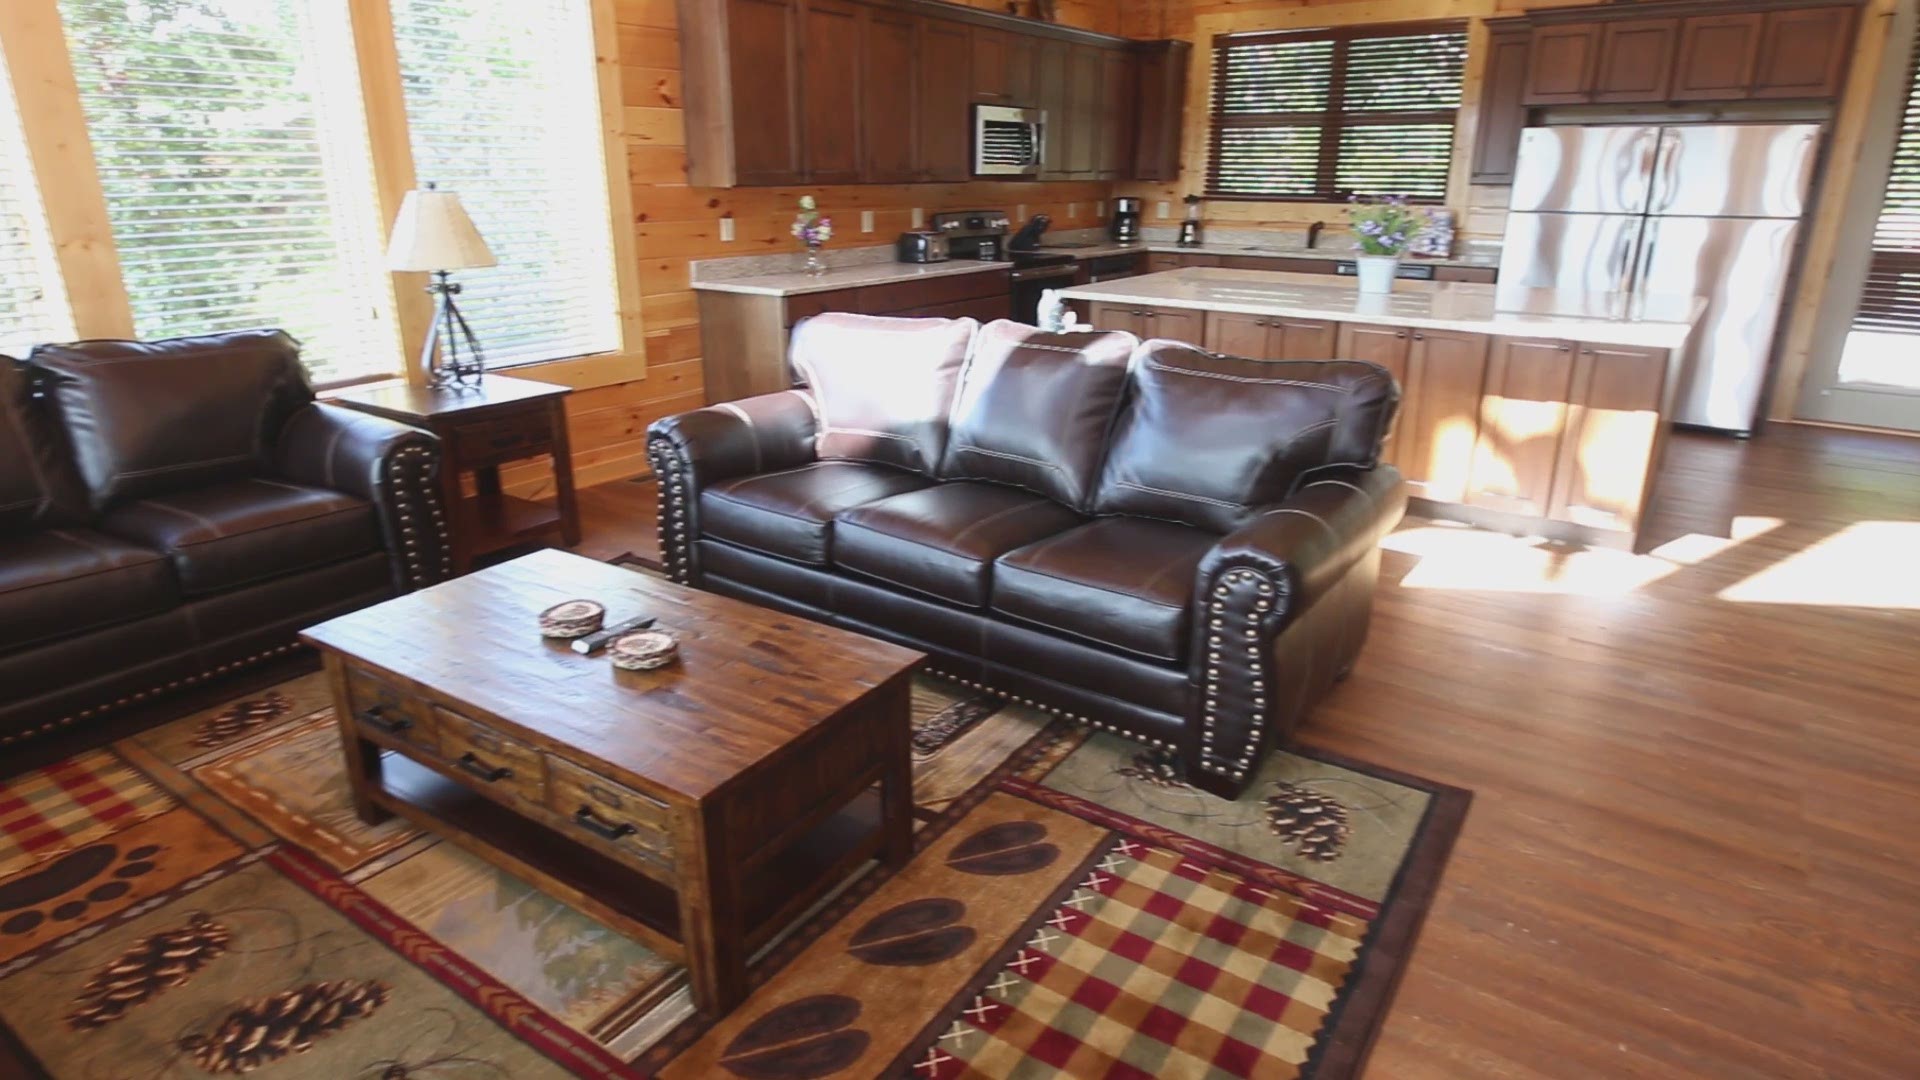 The $1.5 million cabin that has everything